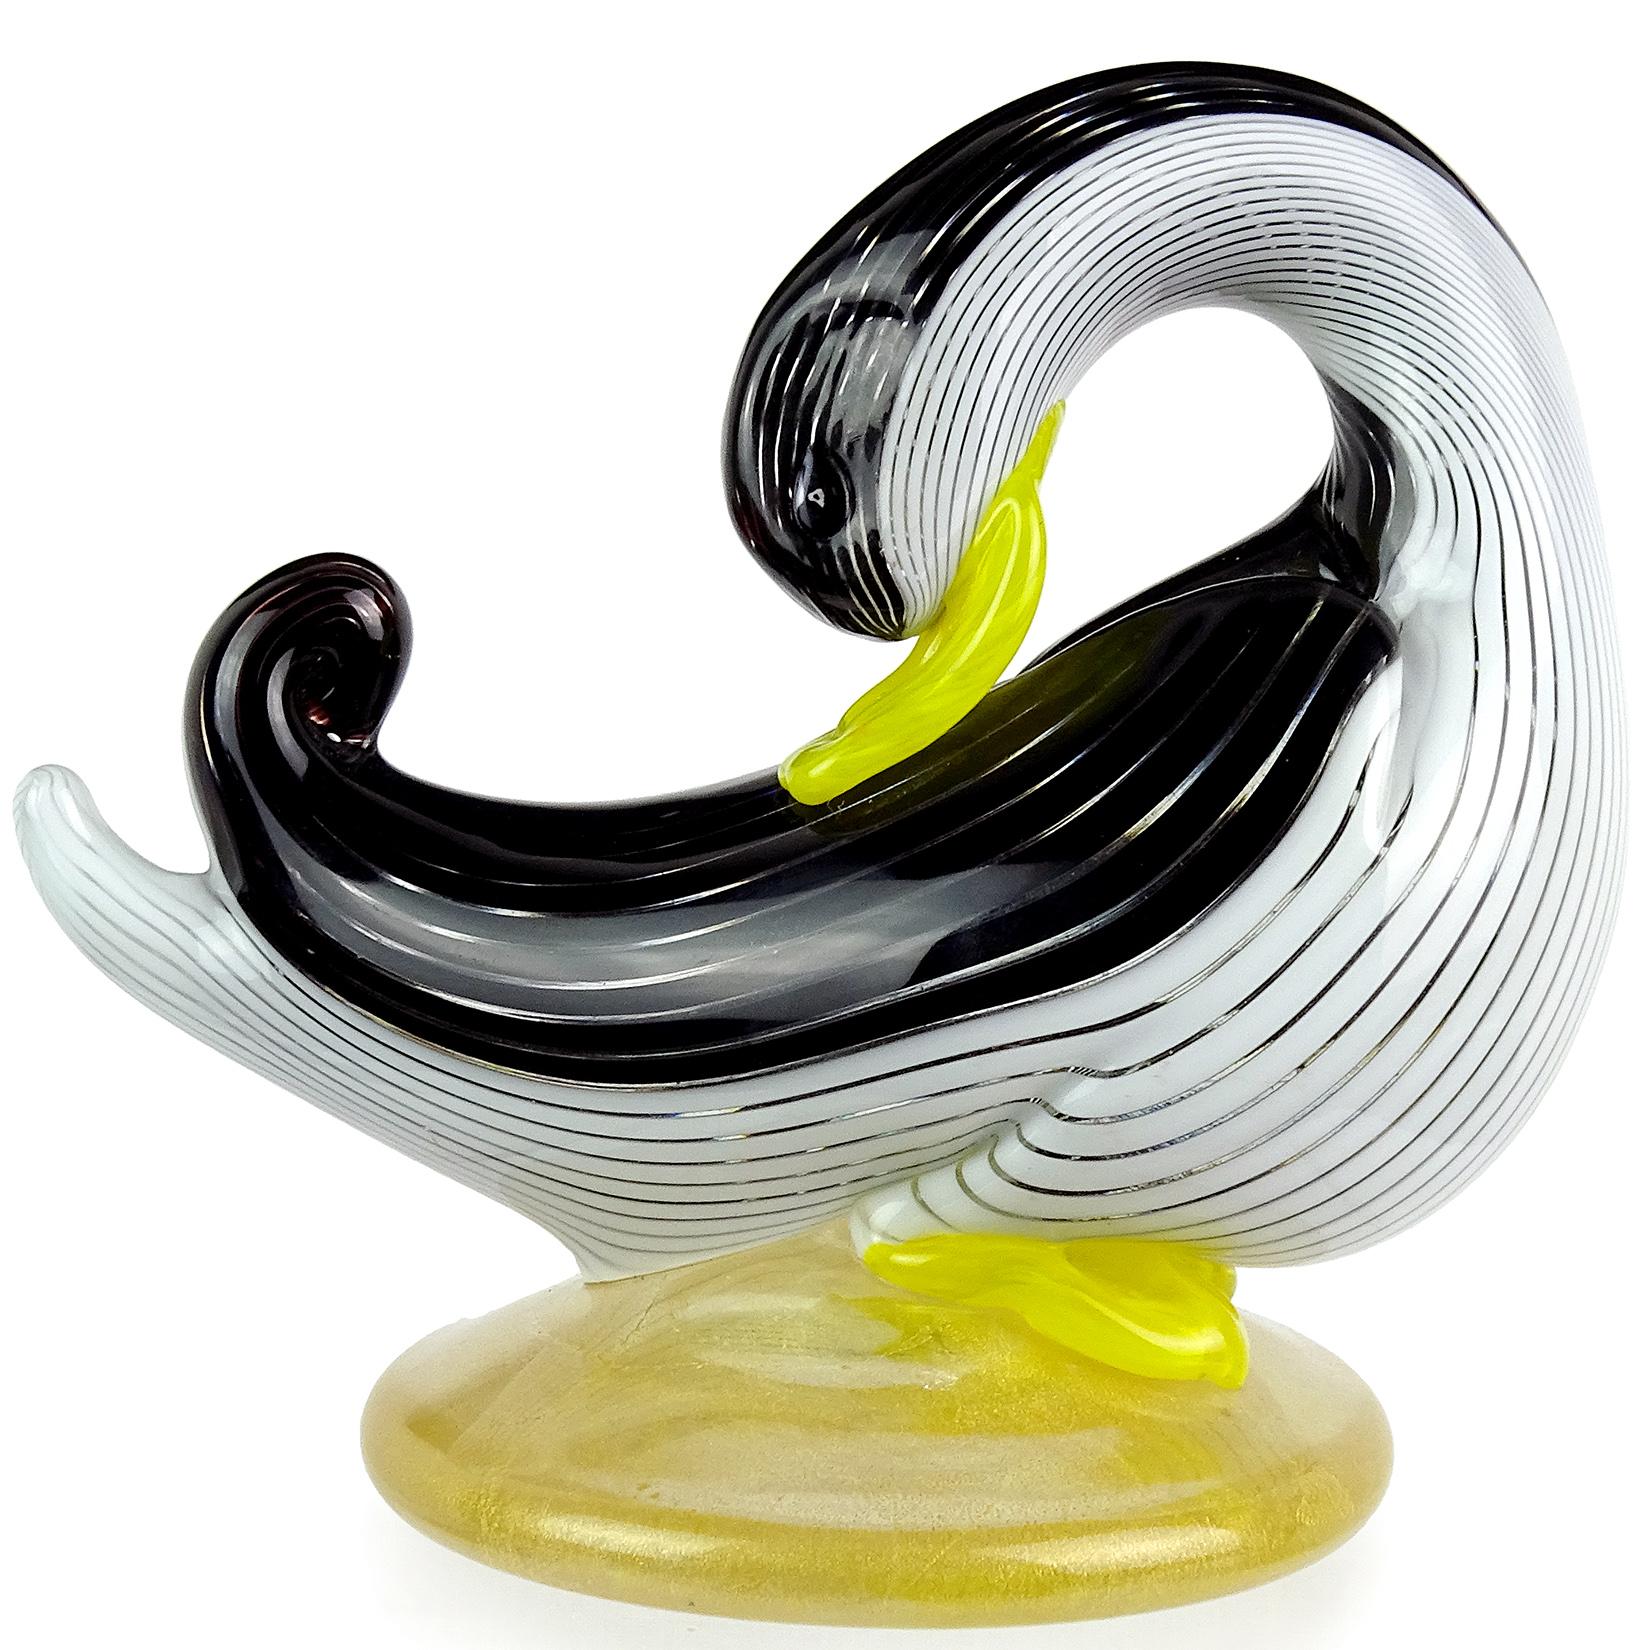 Beautiful Murano handblown black and white ribbons Italian art glass duck sculpture on gold base. Documented to designer Dino Martens for Aureliano Toso, and published in his book (see last photo), circa 1954. Model number 5902, in 